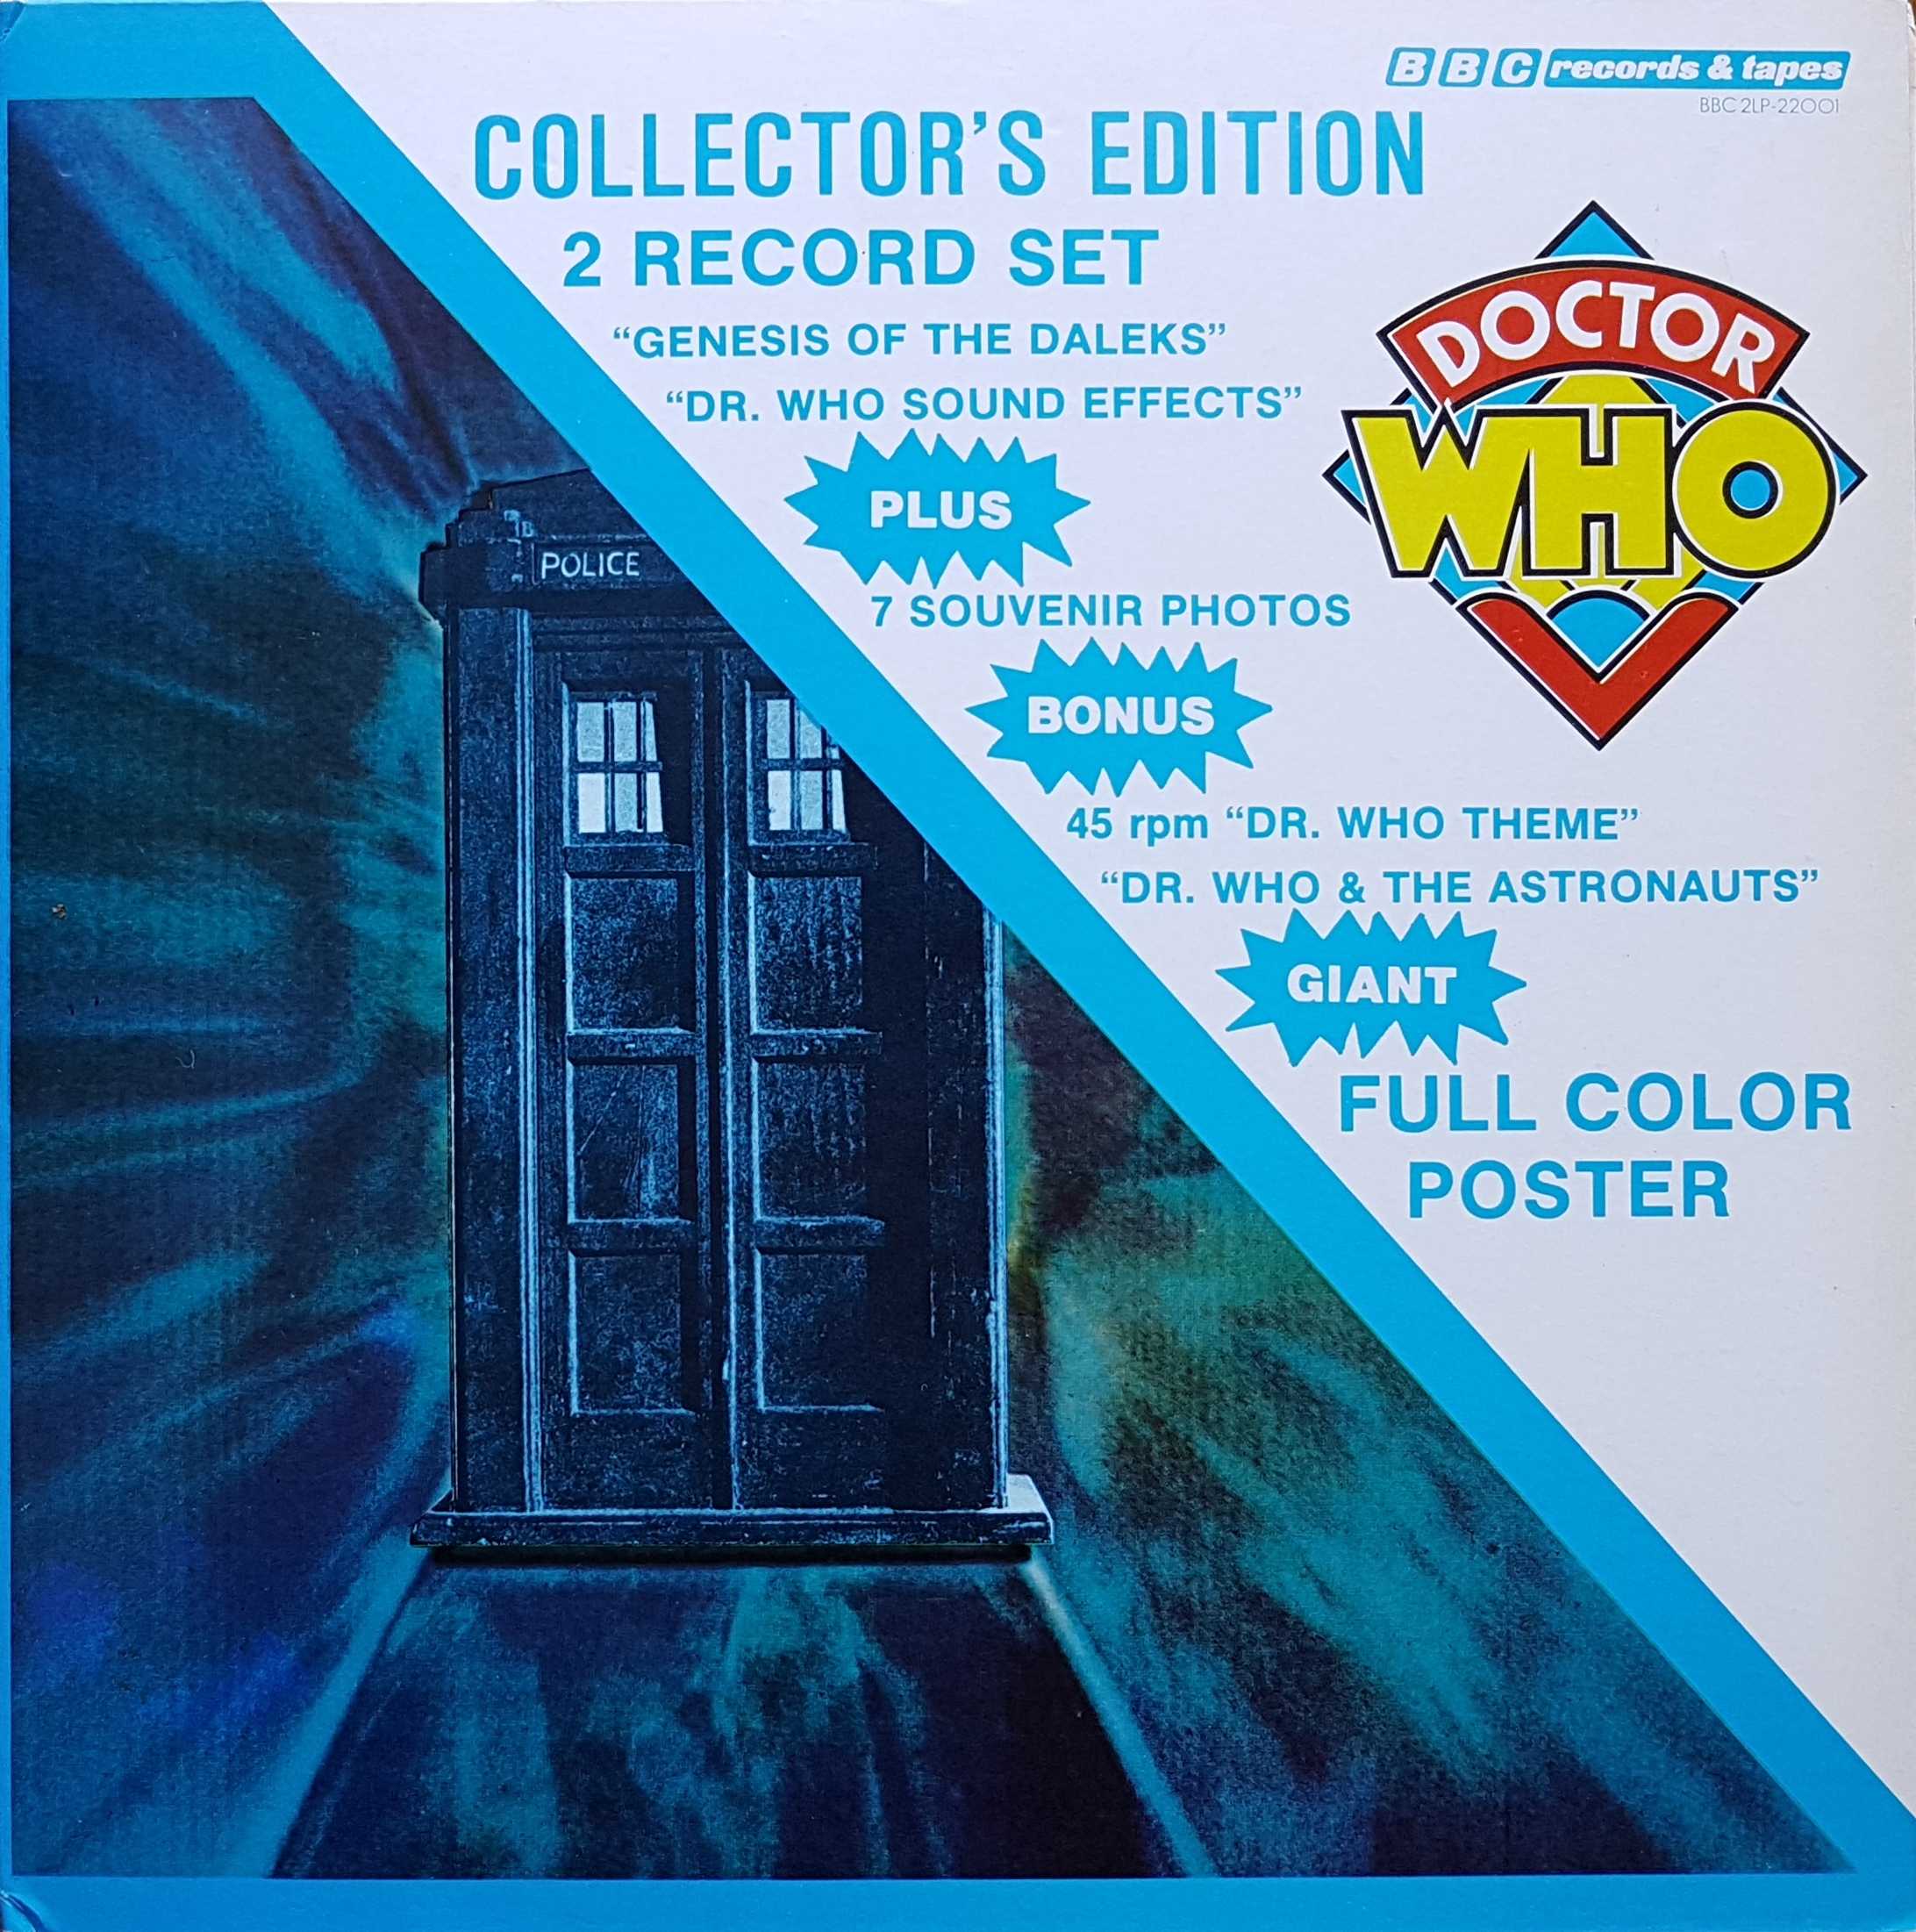 Picture of BBC2LP-22001 Doctor Who - Collectors edition by artist Various from the BBC albums - Records and Tapes library